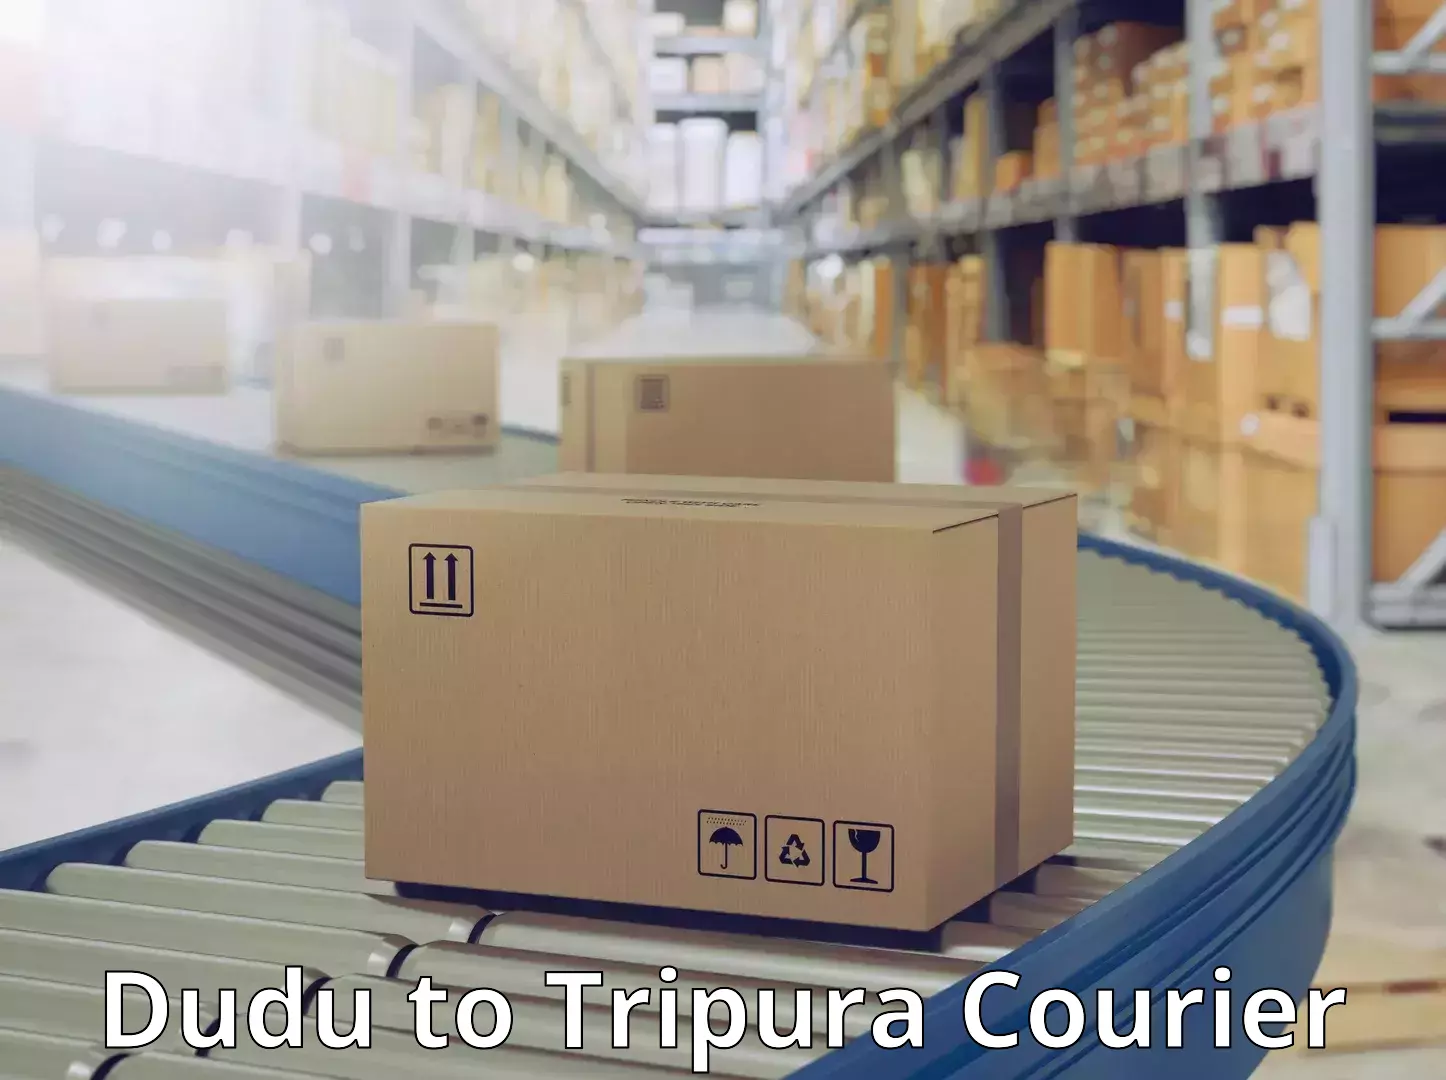 Reliable courier service Dudu to Tripura